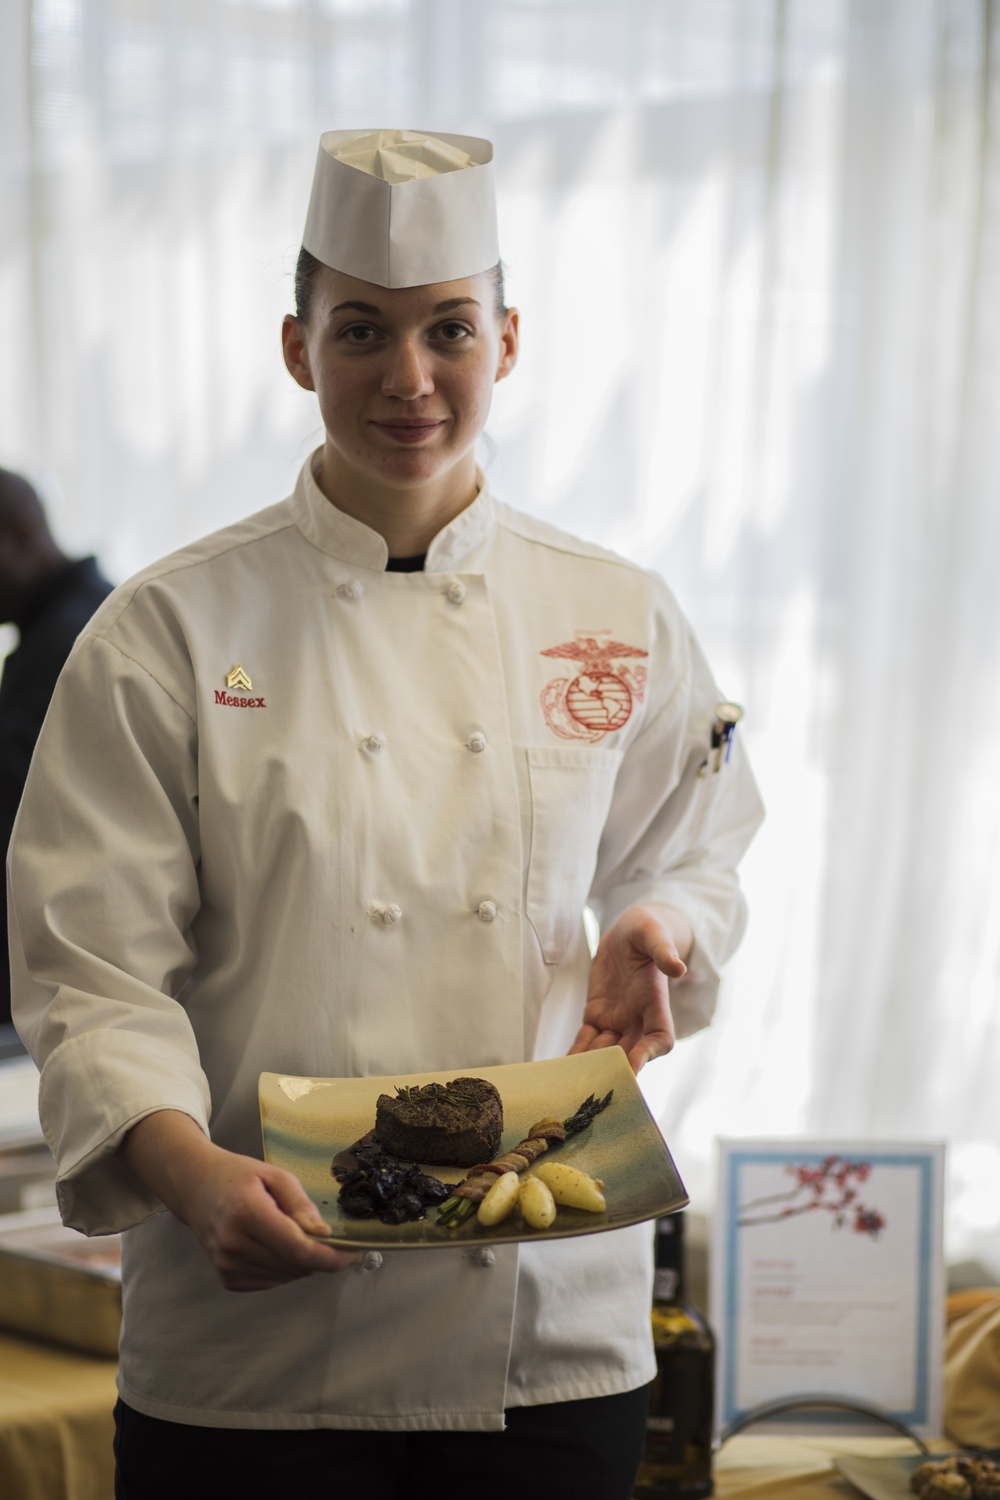 Food Service Specialist competition heats up